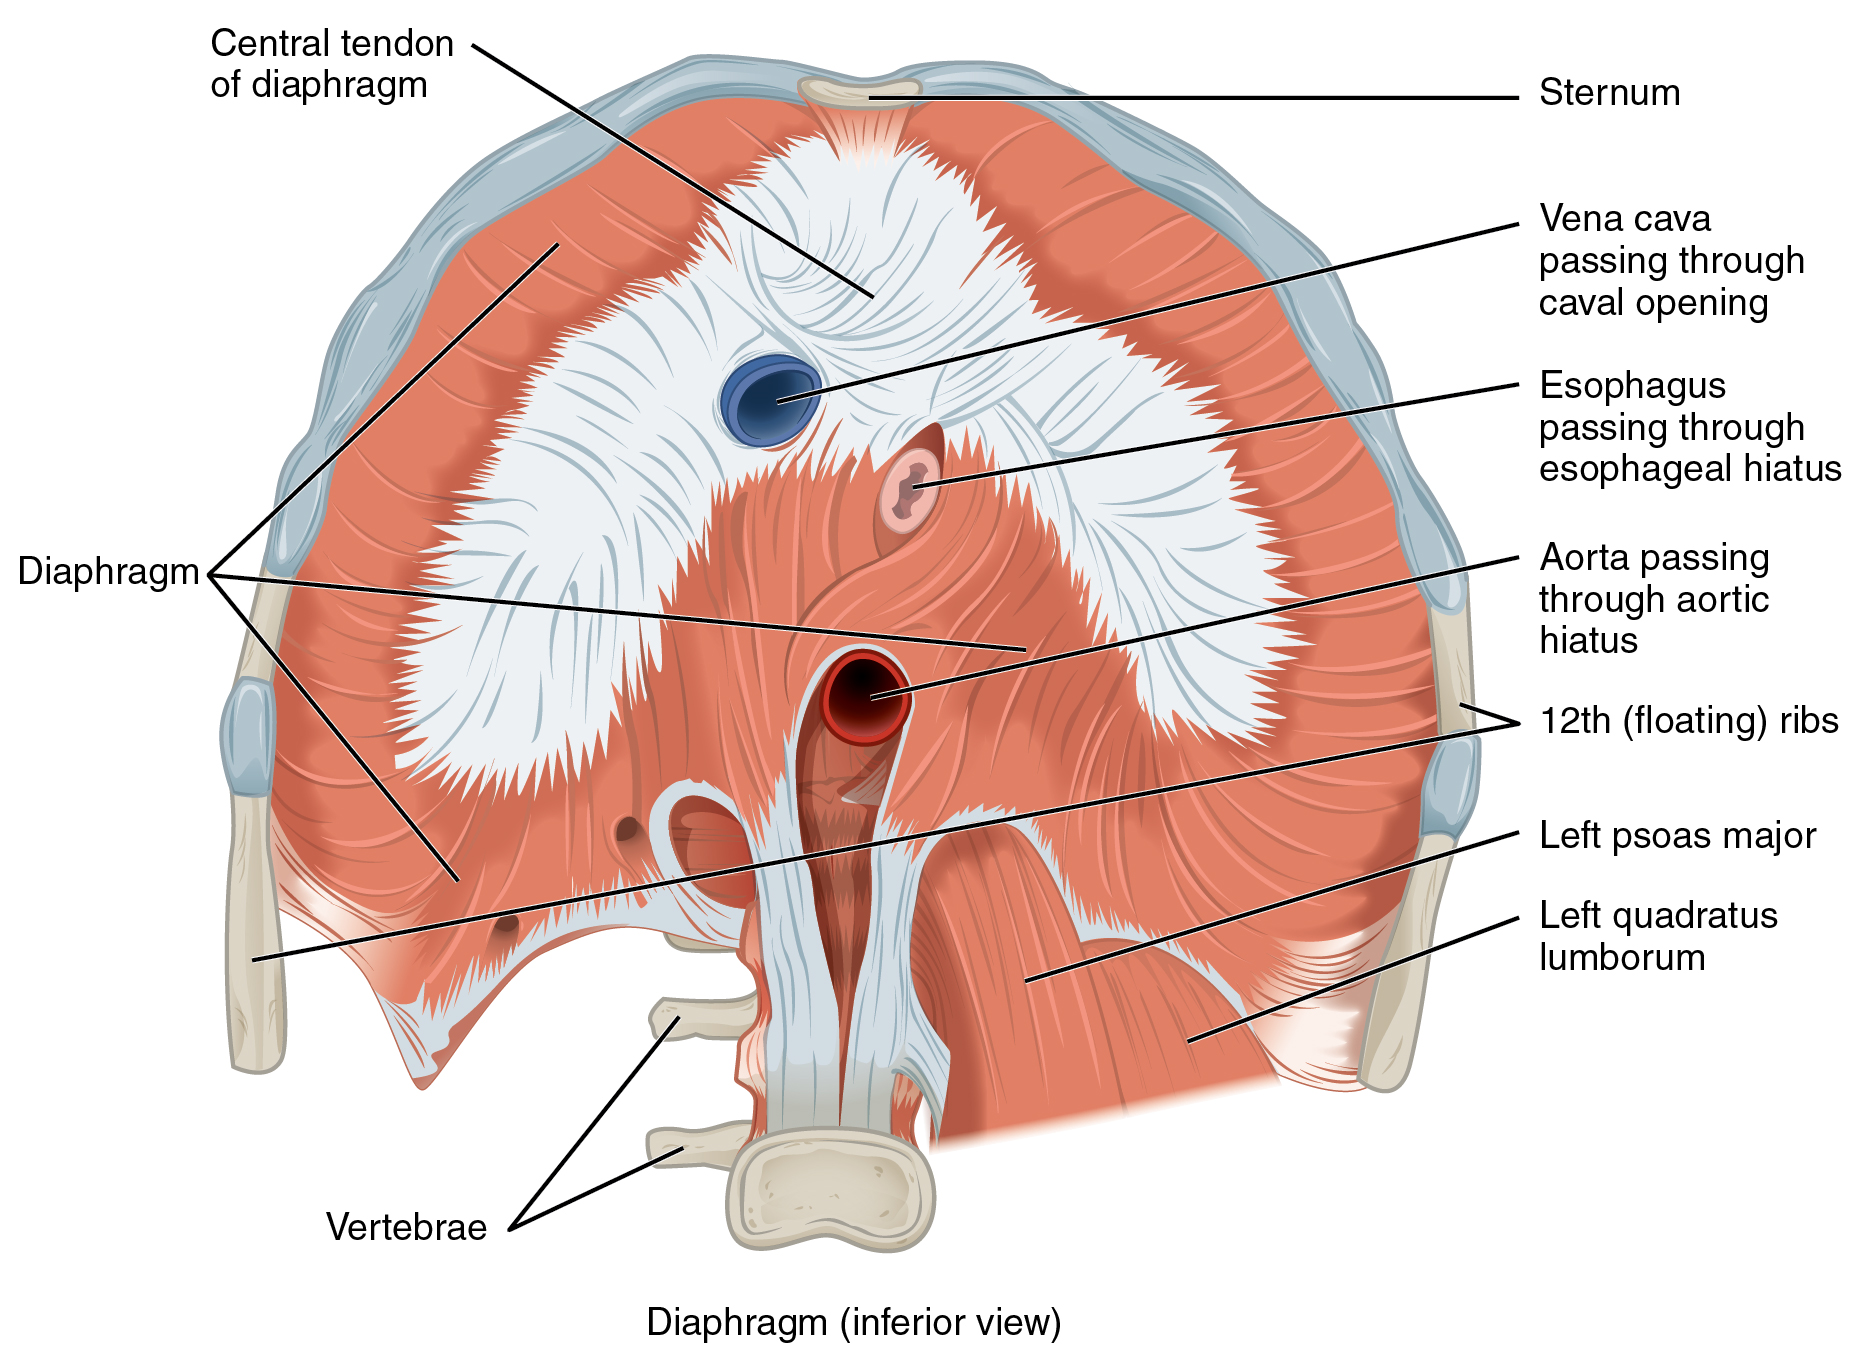 This figure shows the inferior view of the diaphragm with the major parts labeled.